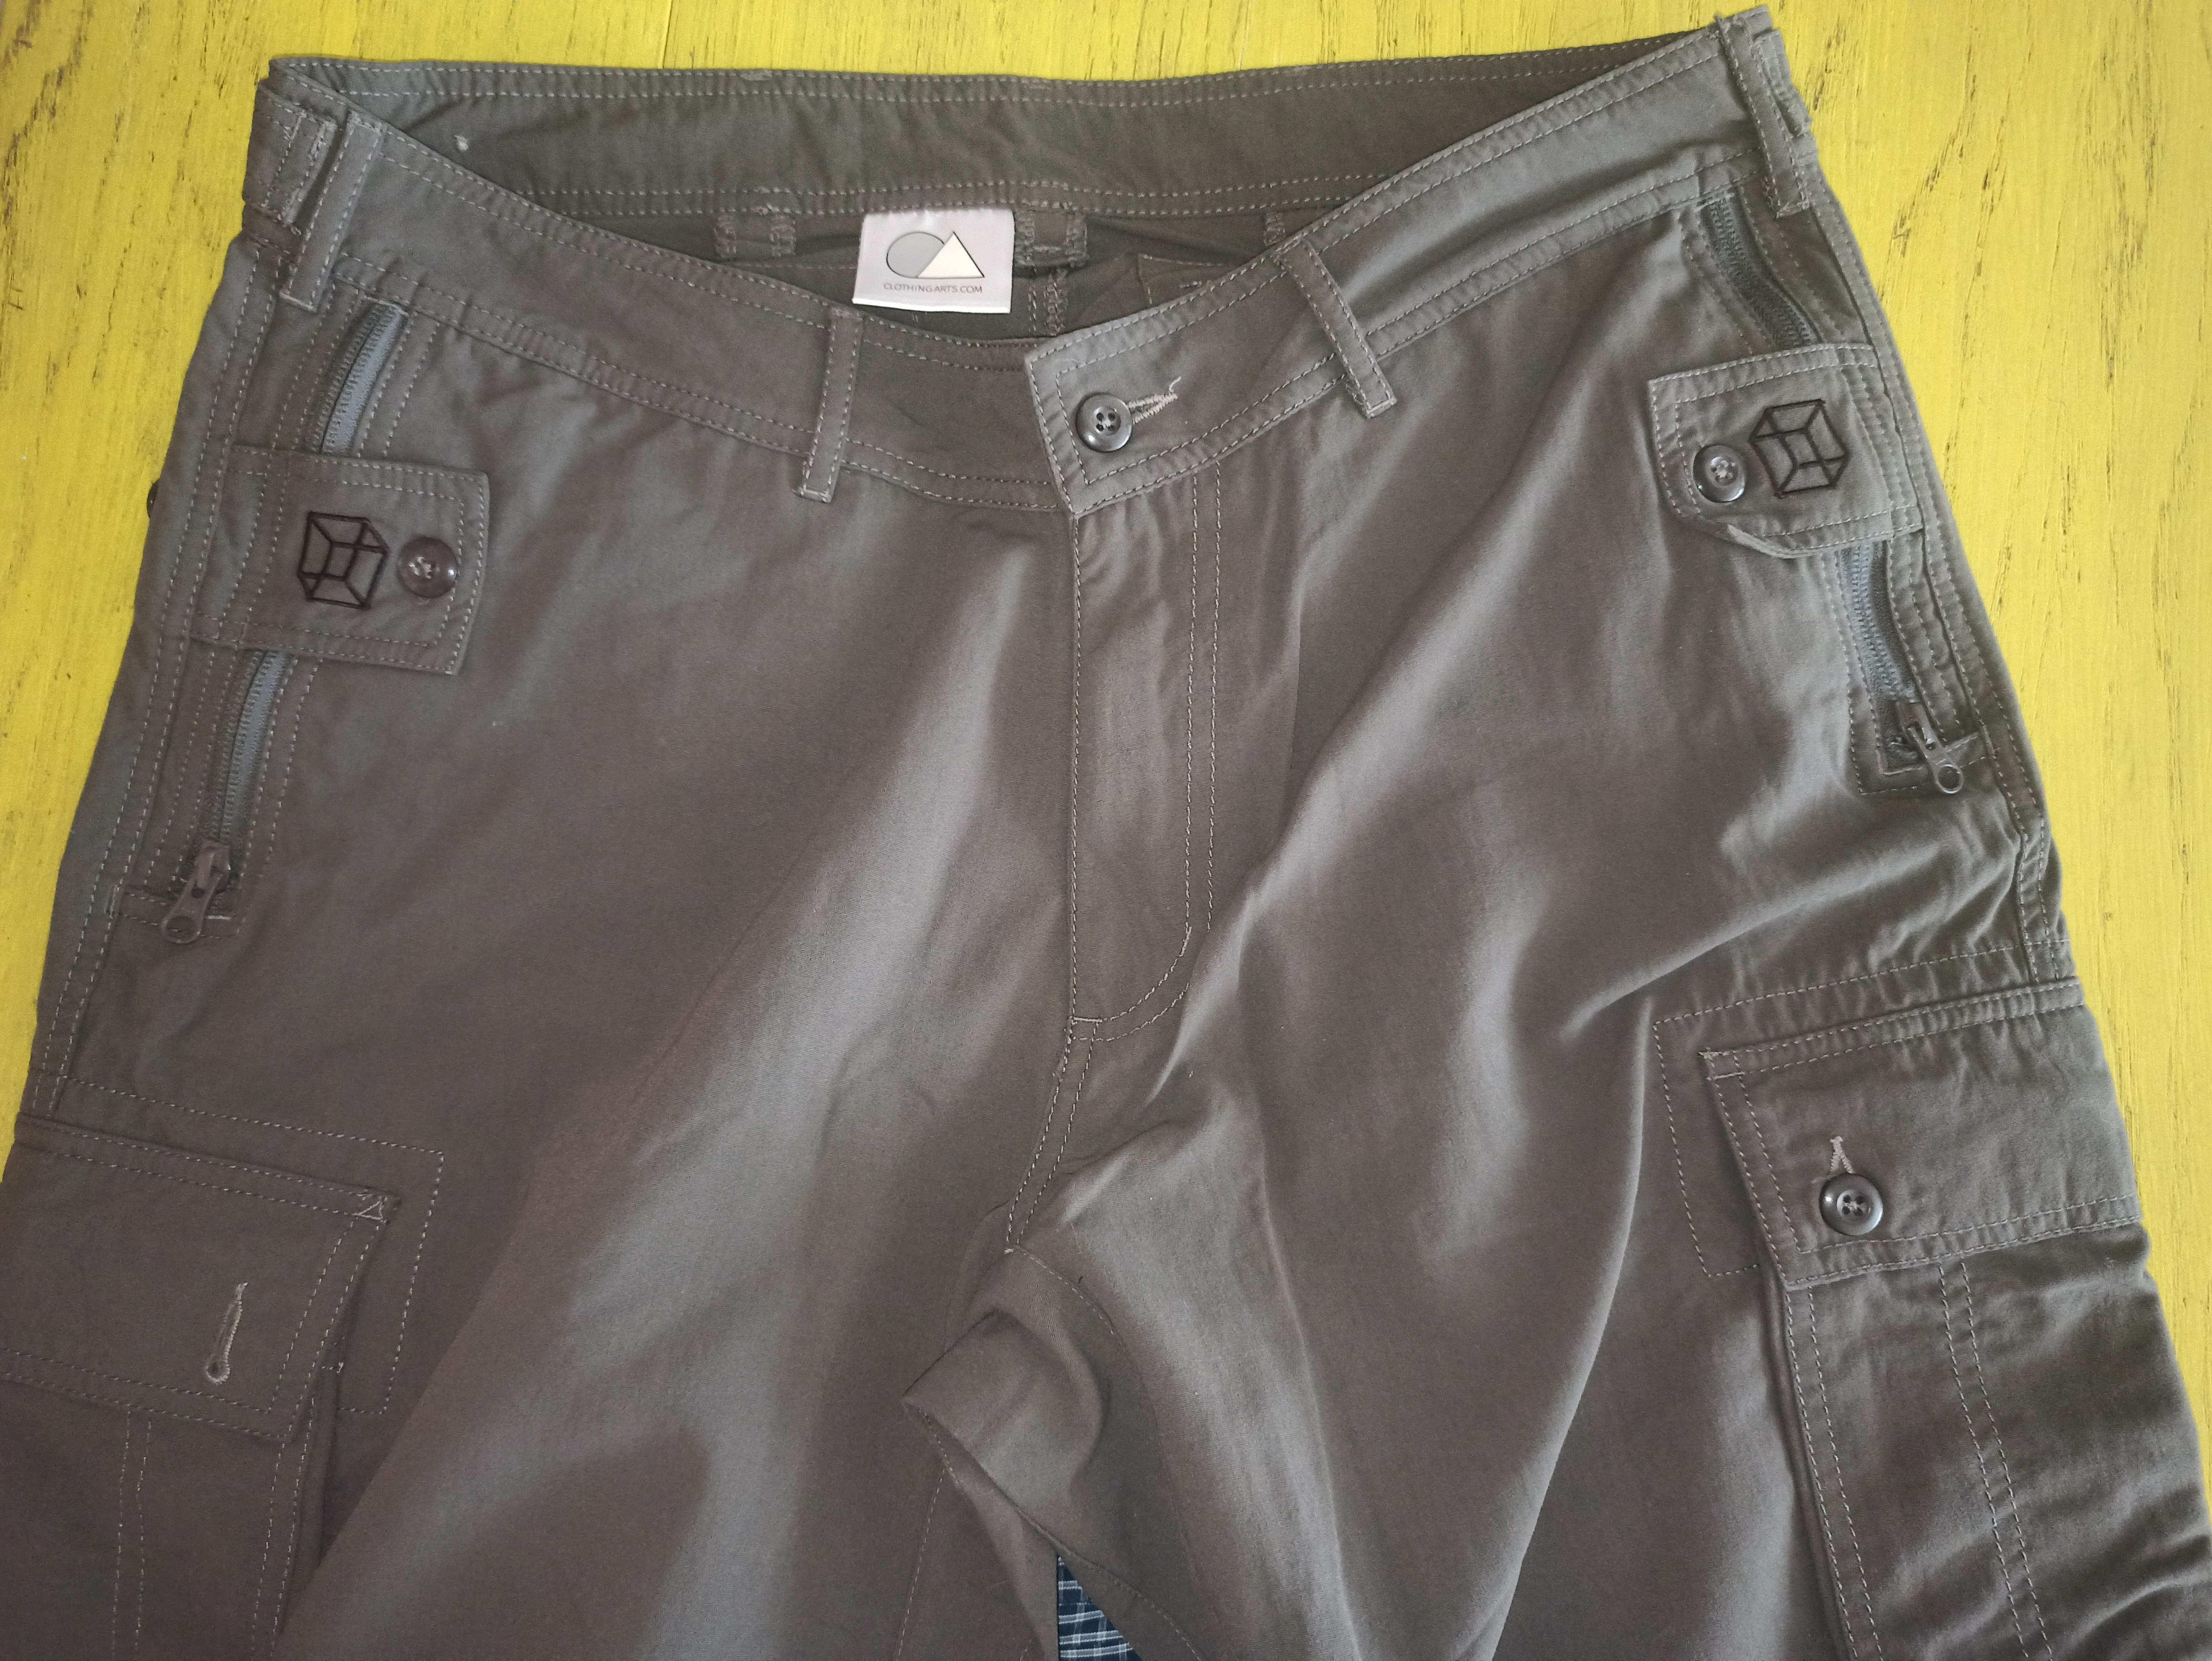 Review - Clothing Arts Pick Pocket Proof Business Pants - Miles per Day